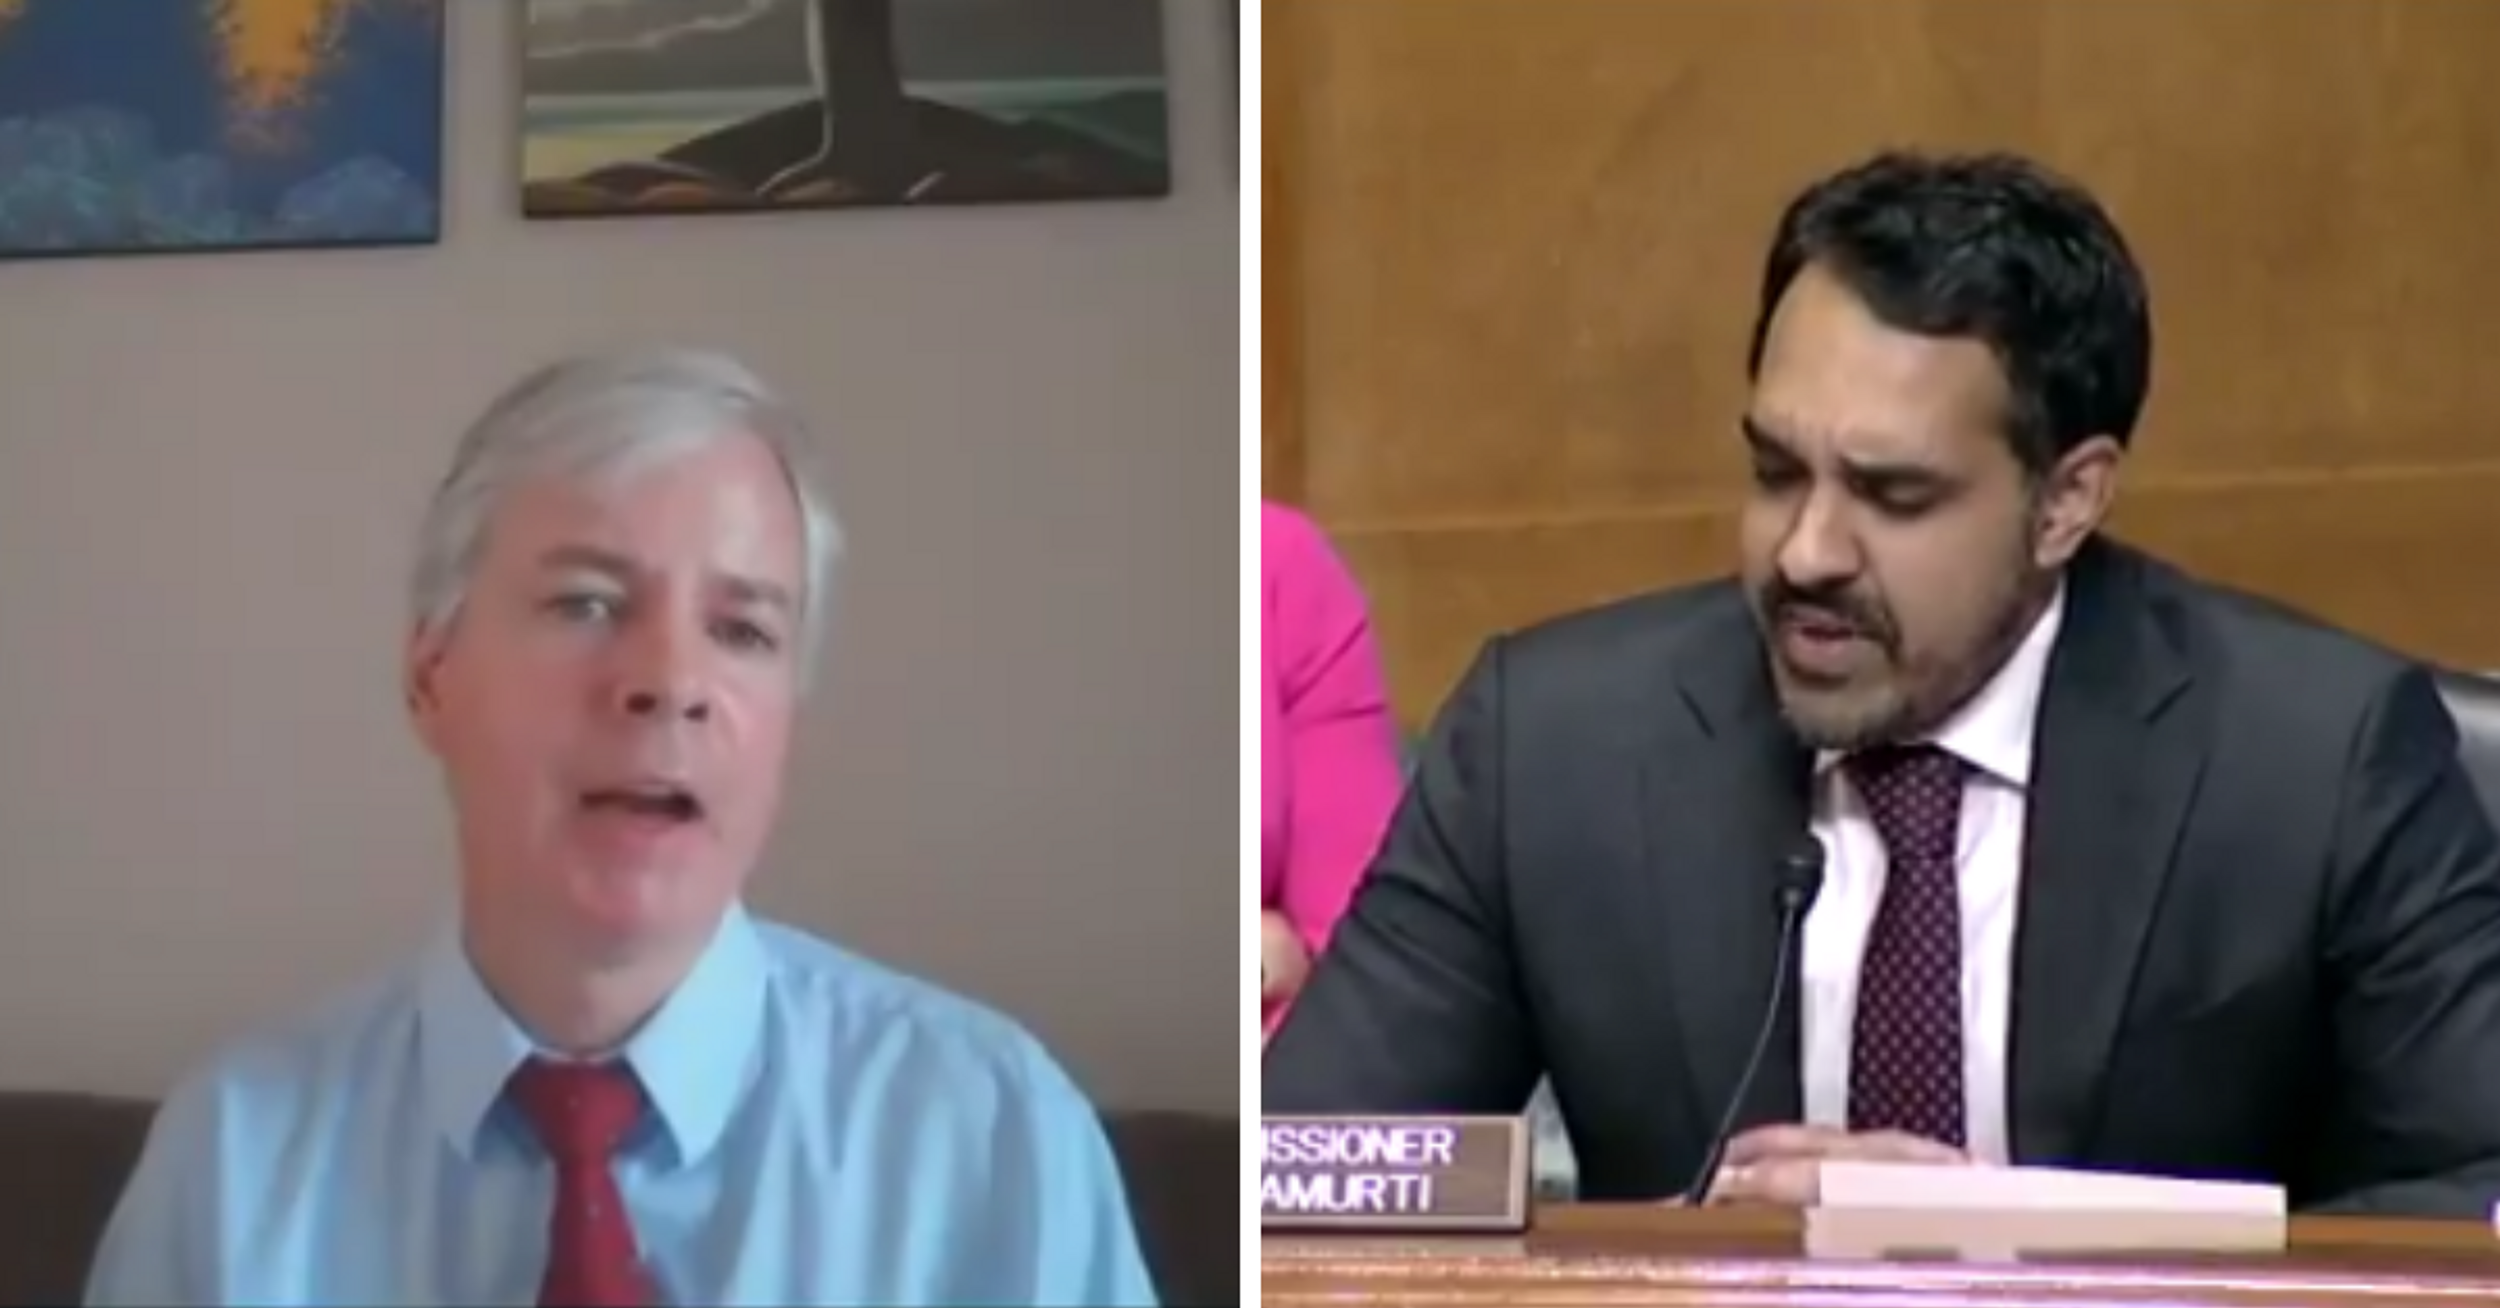 GOP Witness Gets Epically Called Out By Democratic Rep. For Citing Study That Actually Refutes His Claims